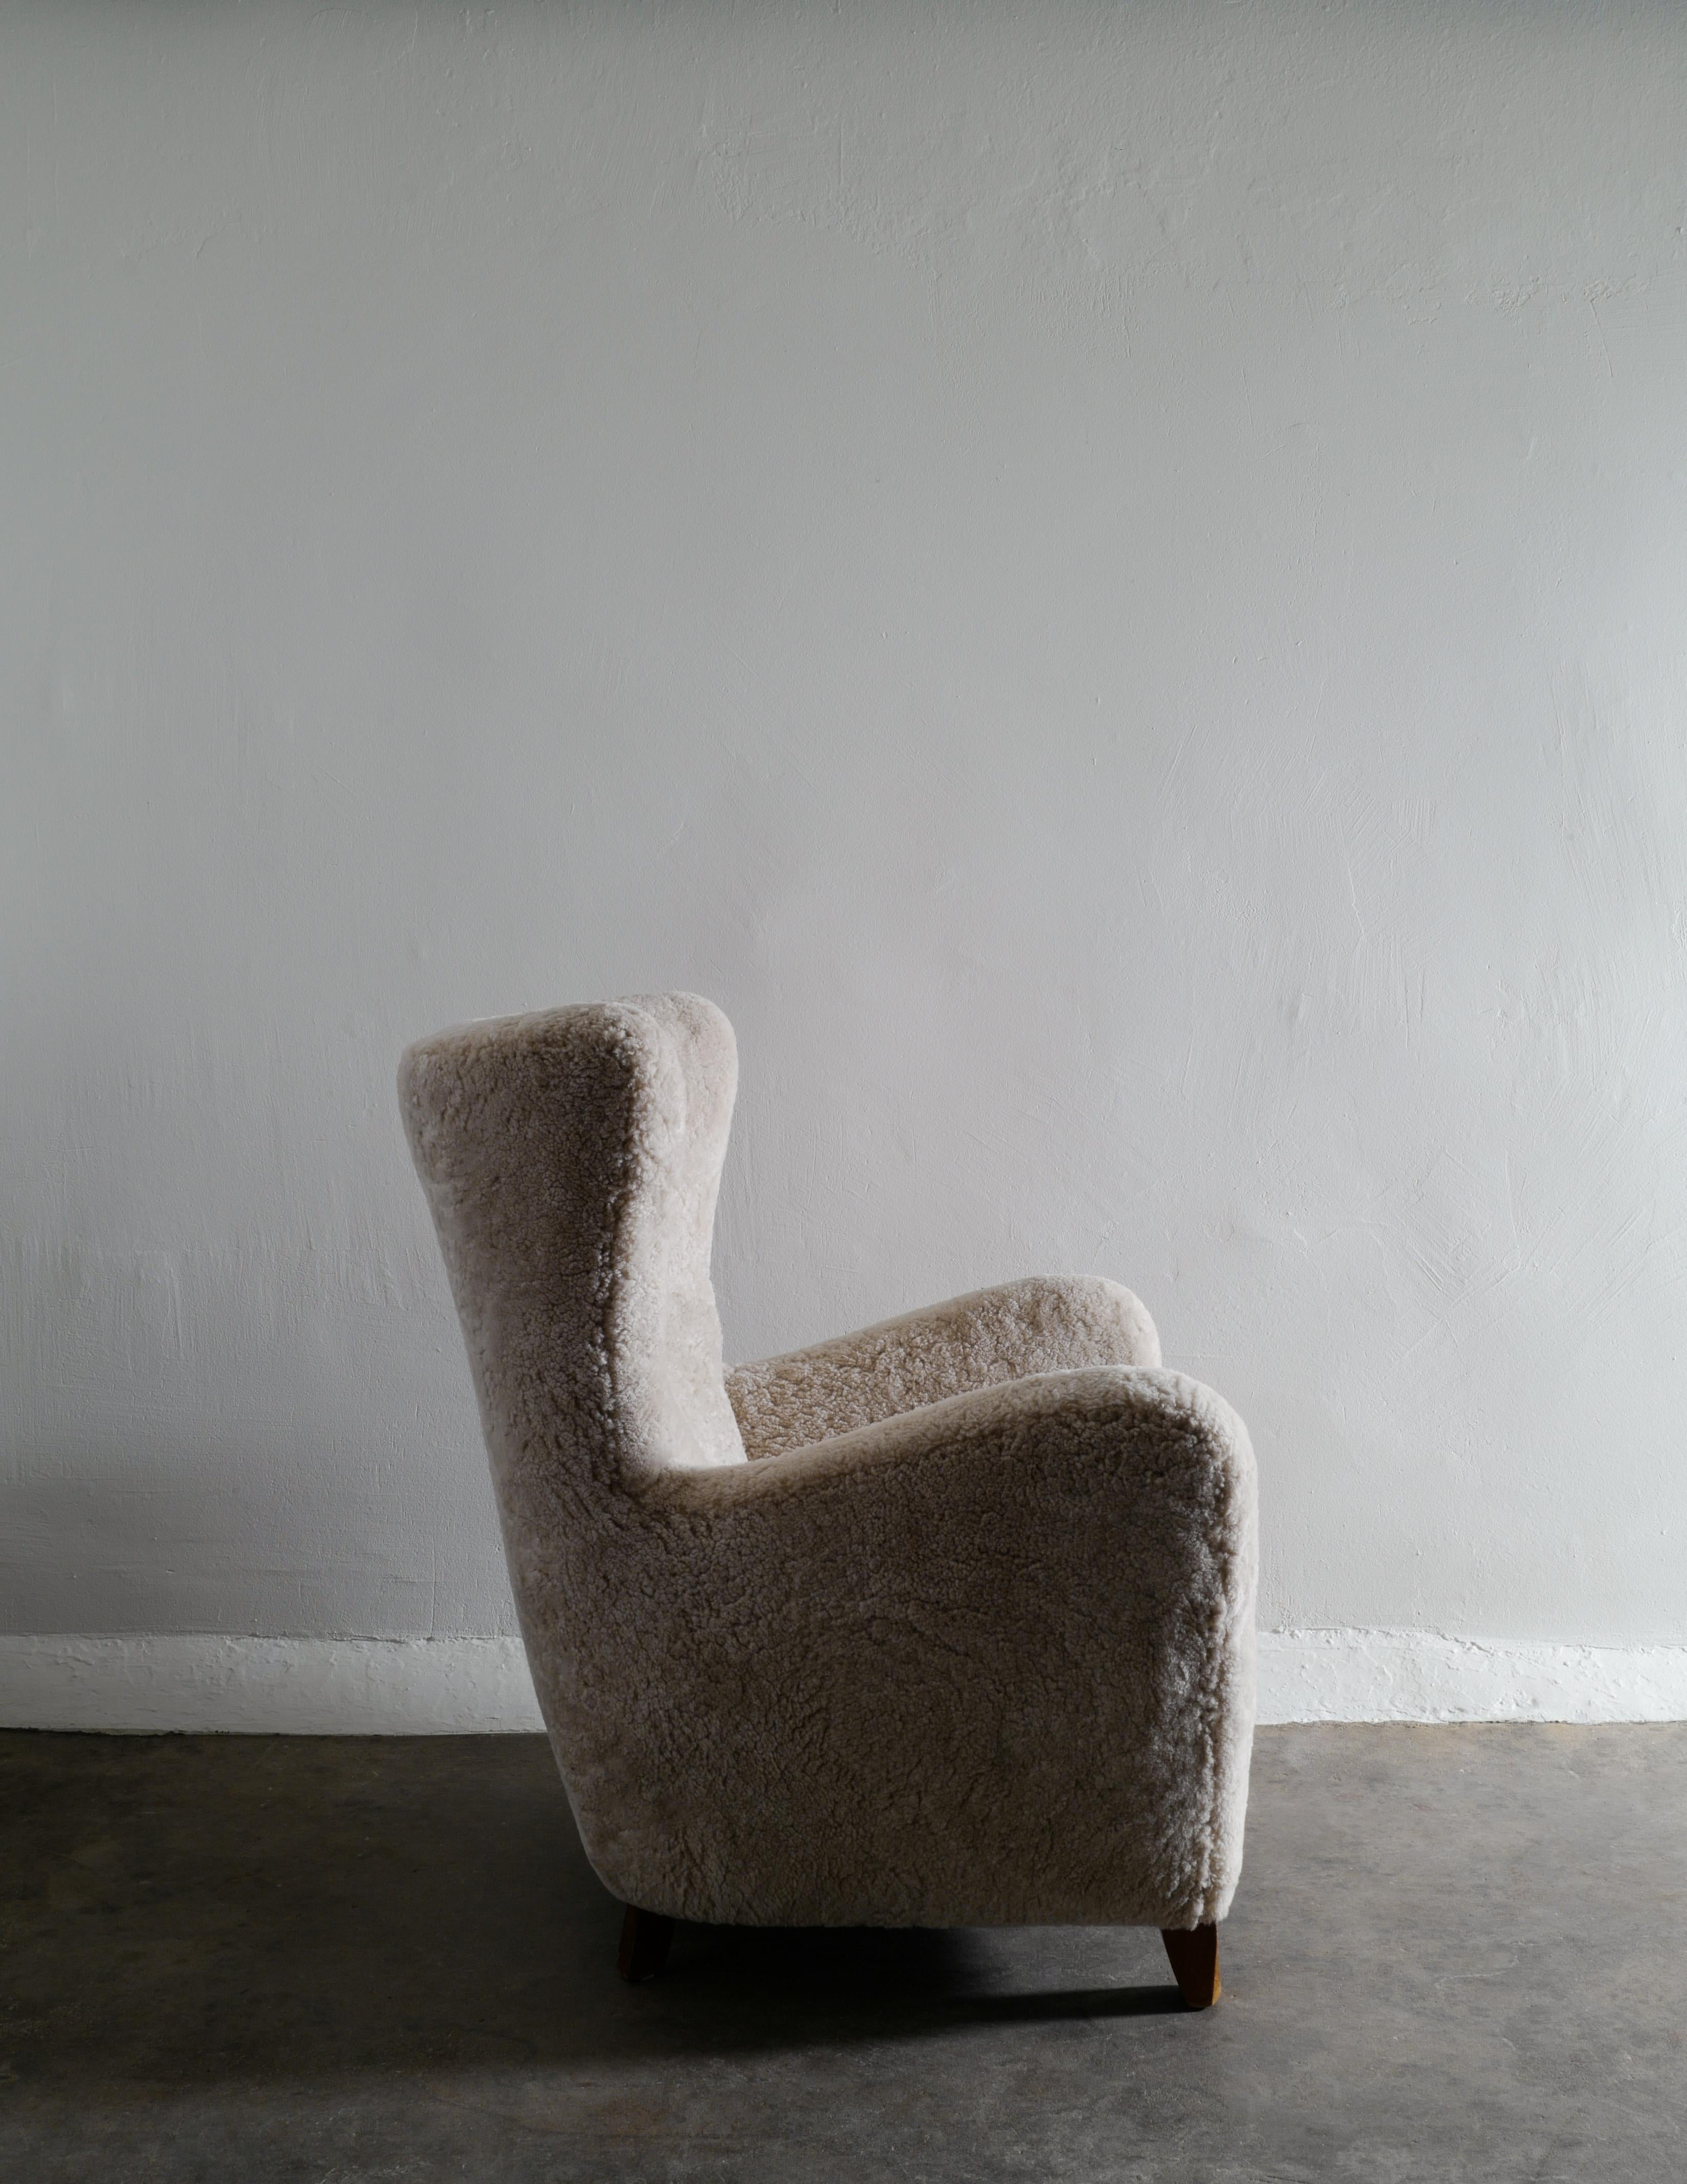 Rare Danish wingback easy armchair in style of Fritz Hansen produced in Denmark around 1940s. Newly restored and upholstered in a soft off white colored sheepskin and in great vintage and overall condition. 

The first picture really describes the